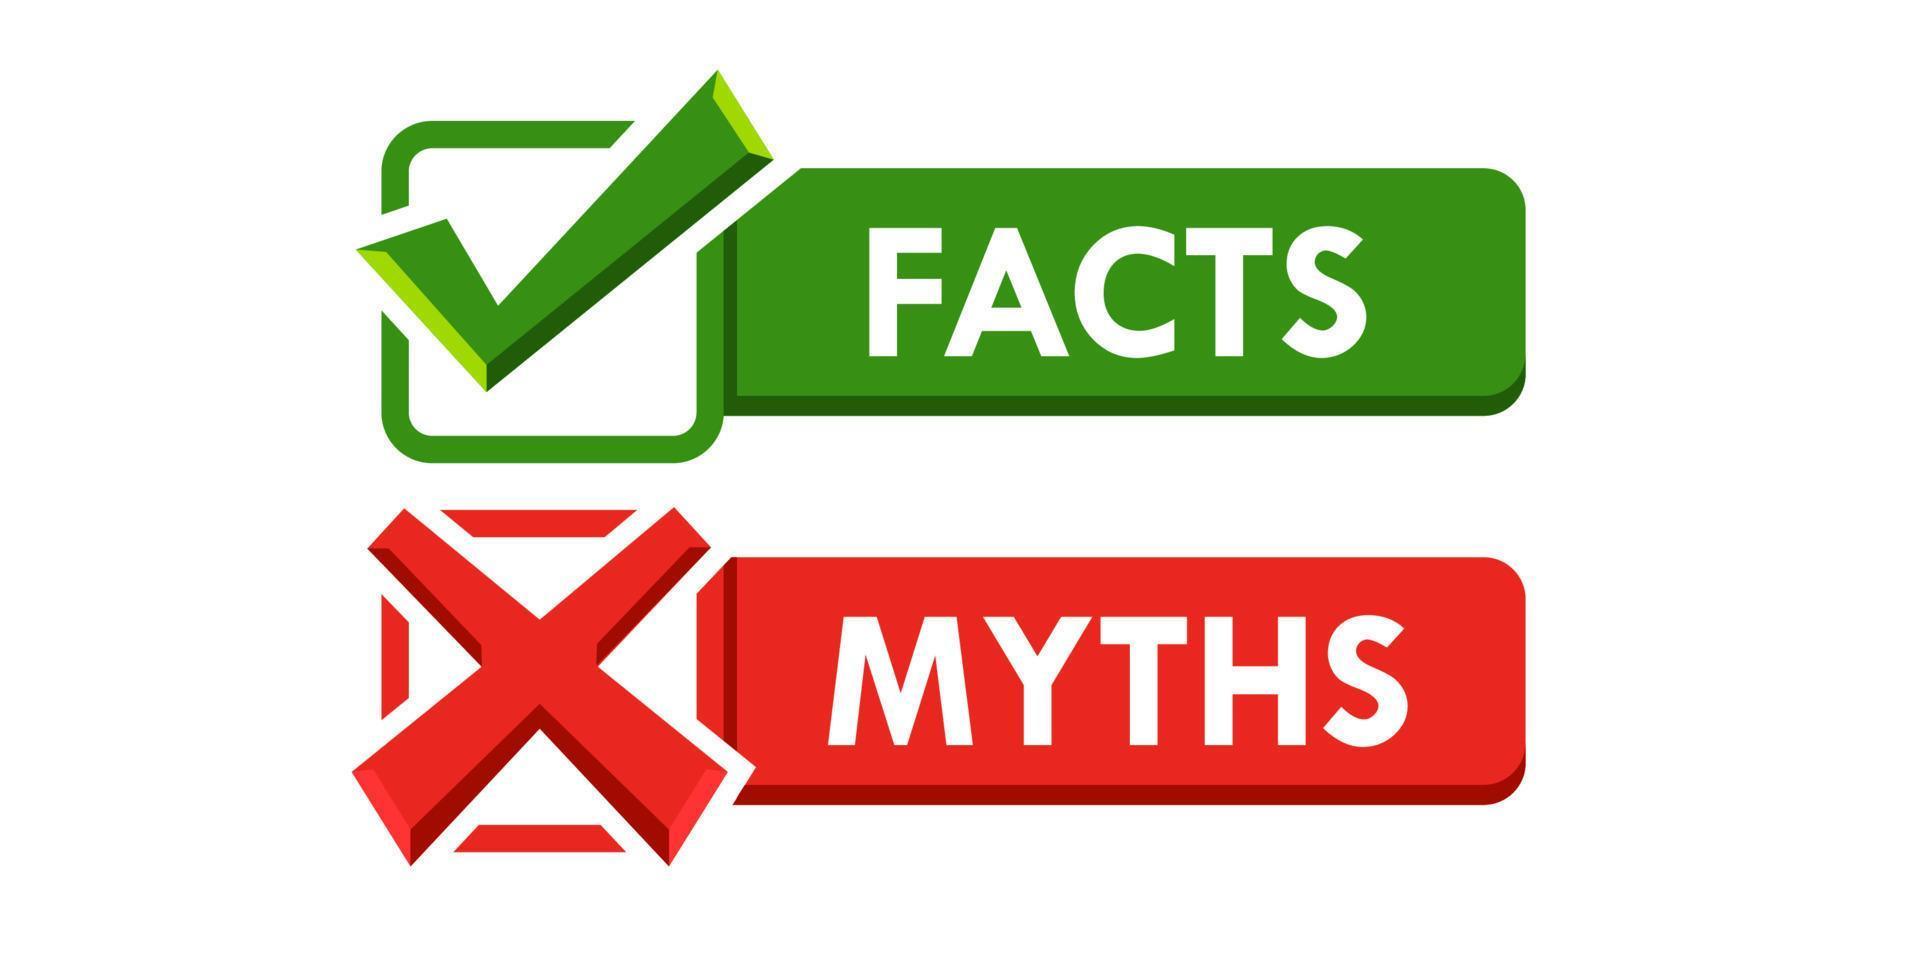 Myths and facts vector. Facts Vector stock illustration. True false sign. Concept of thorough fact-checking in green and red color